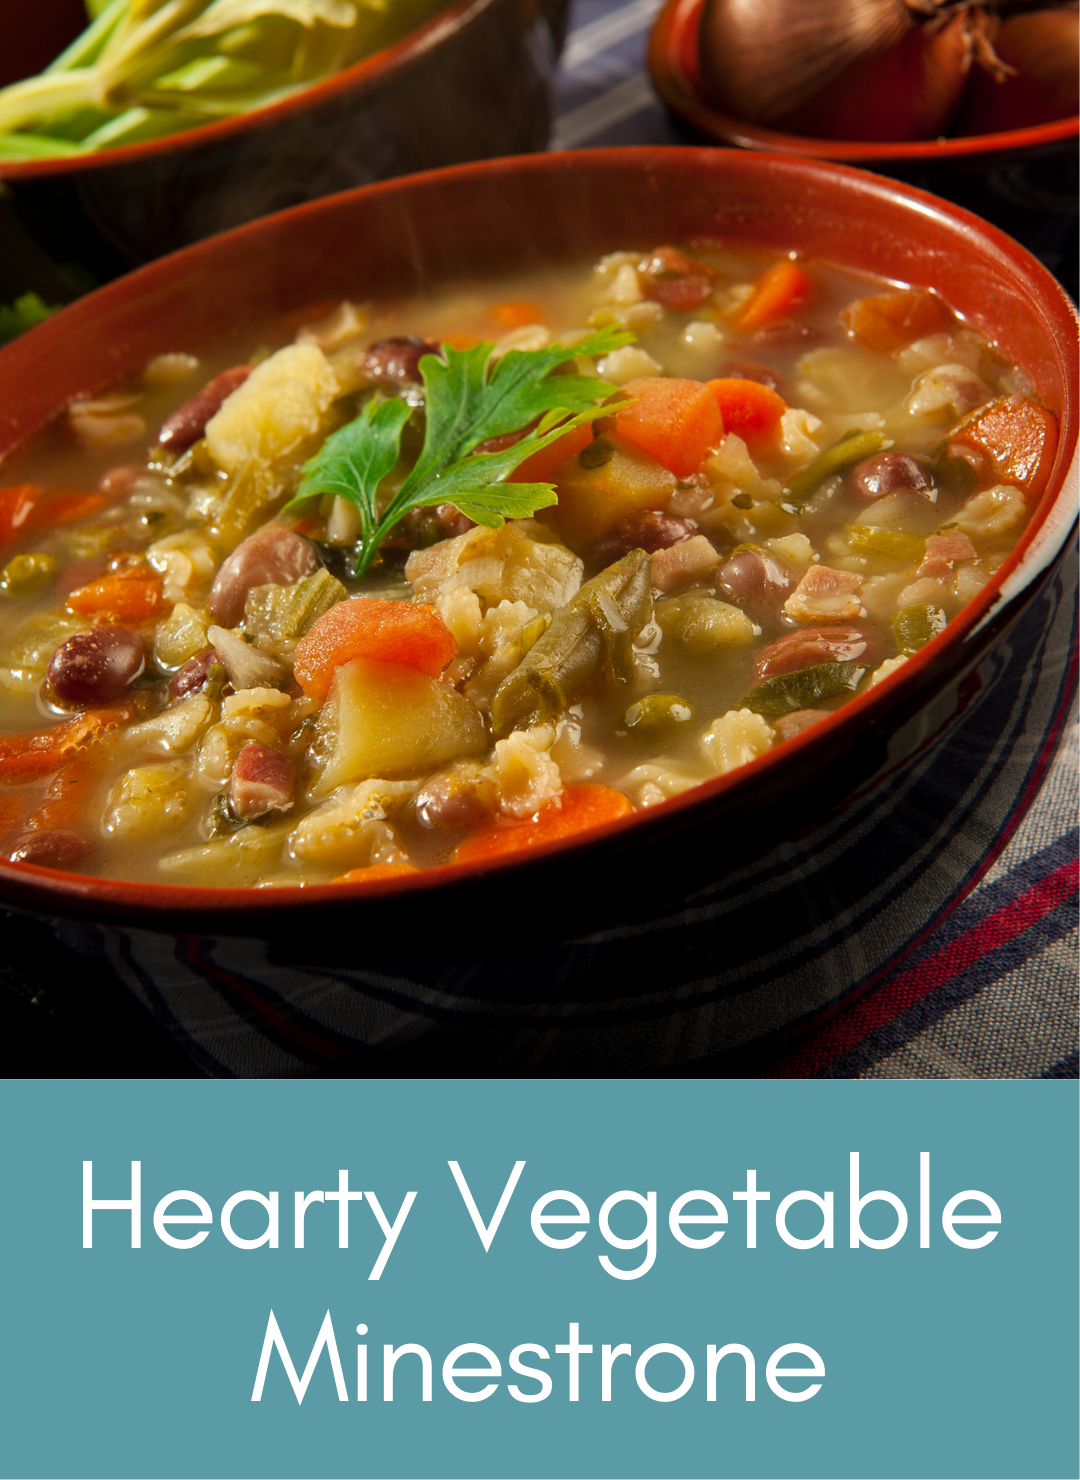 Whole food hearty vegetable minestrone Picture with link to recipe